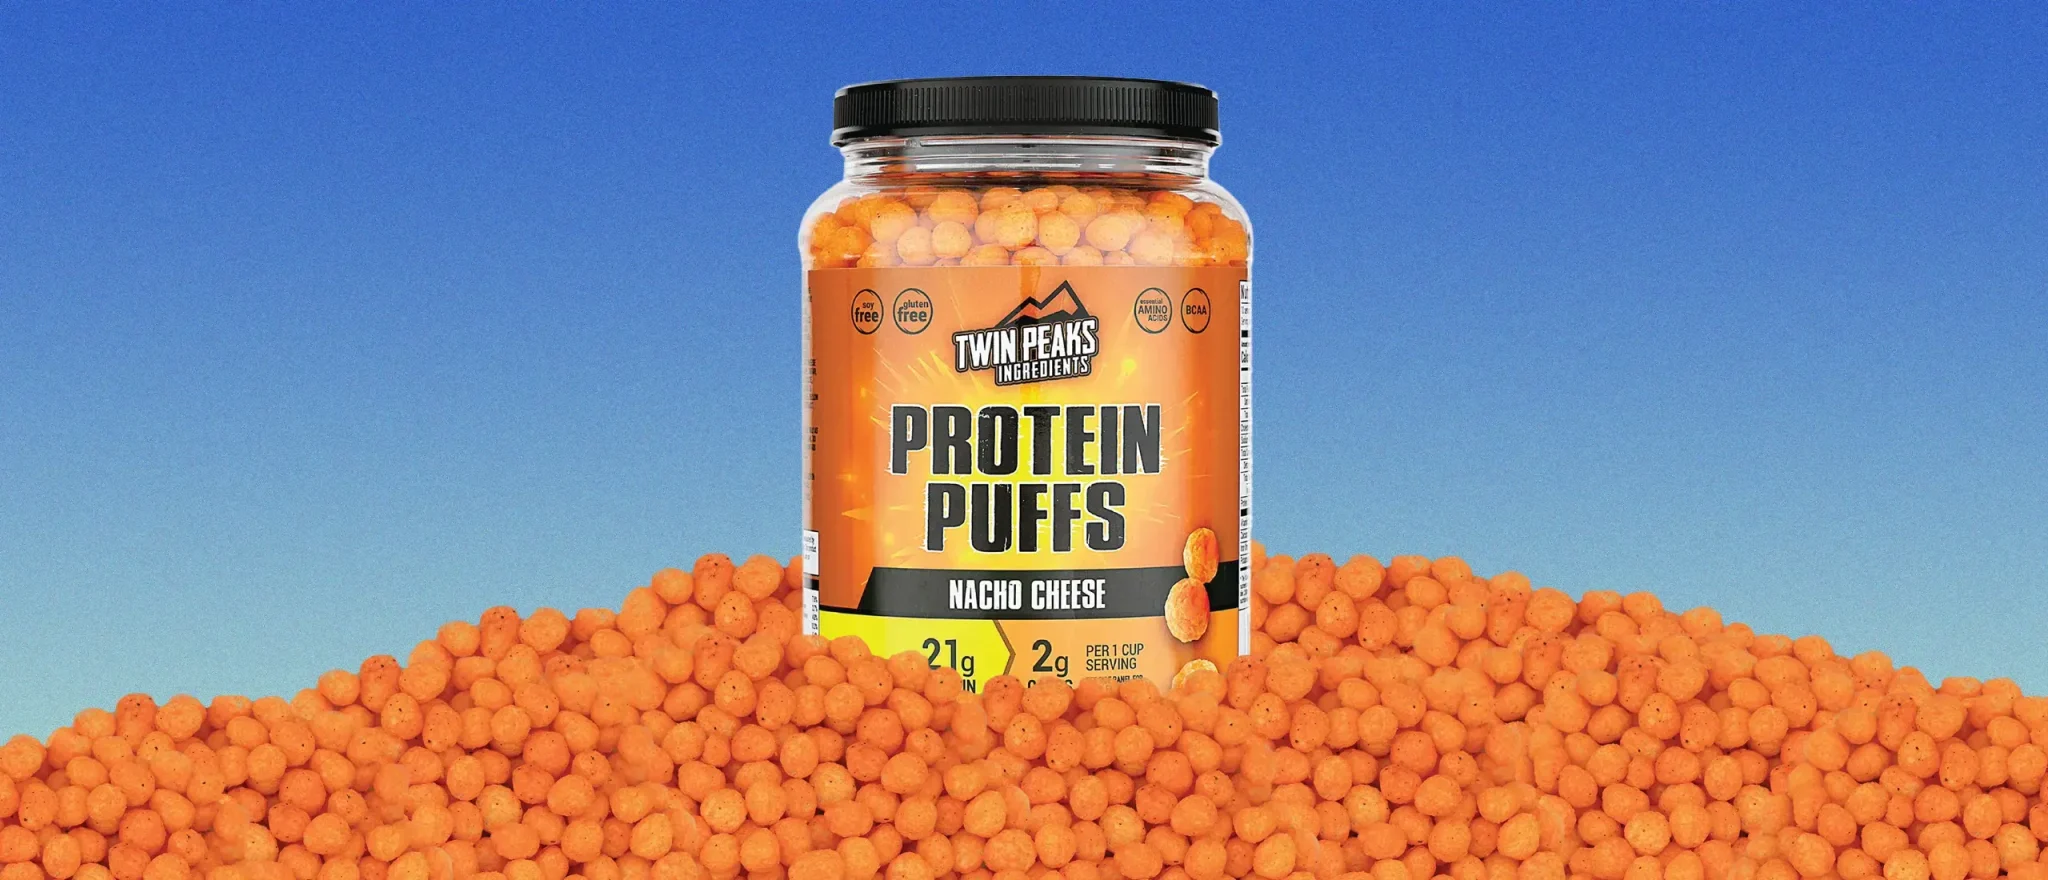 Holy Crap There Are Protein Cheetos on Amazon